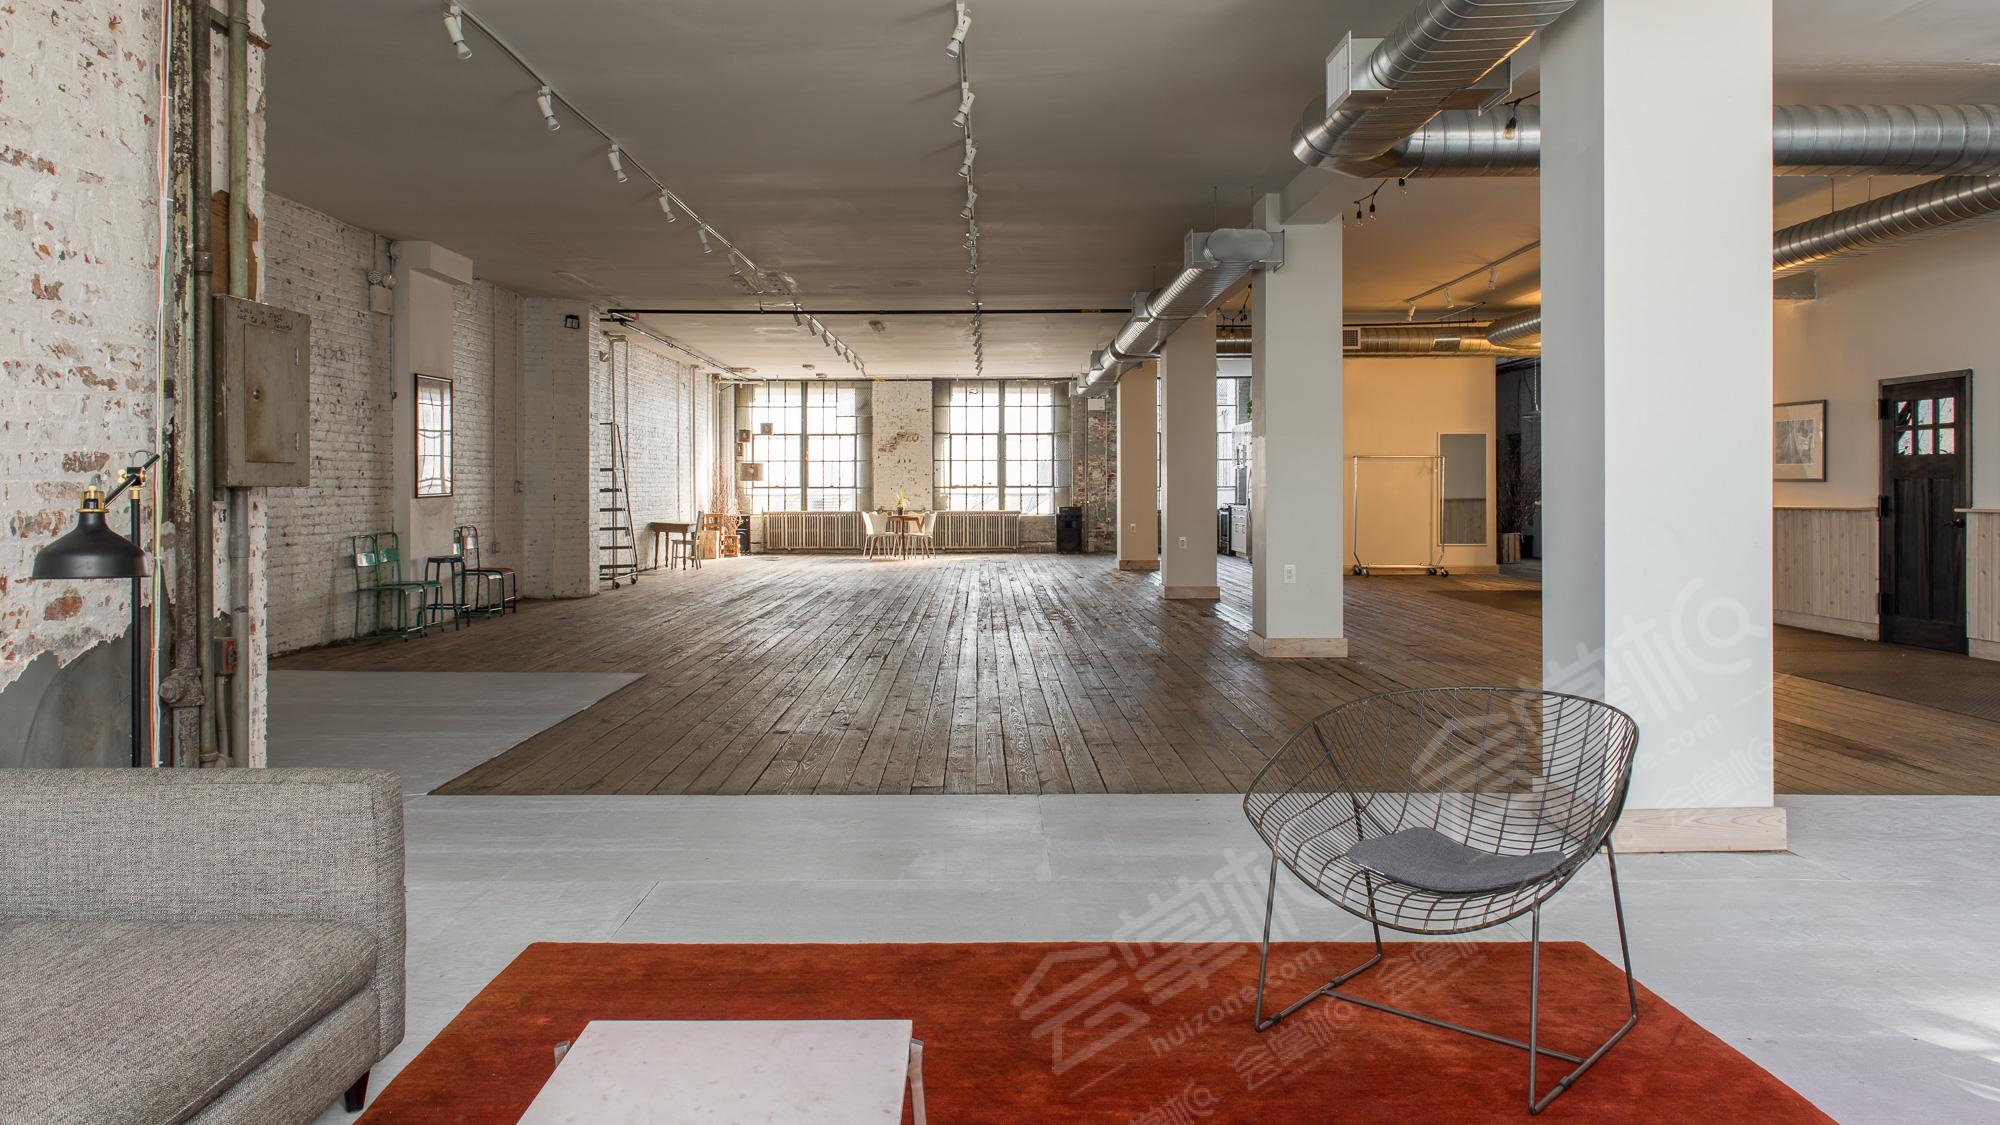 3200 sq/ft Old-School Brooklyn Loft and Event Space